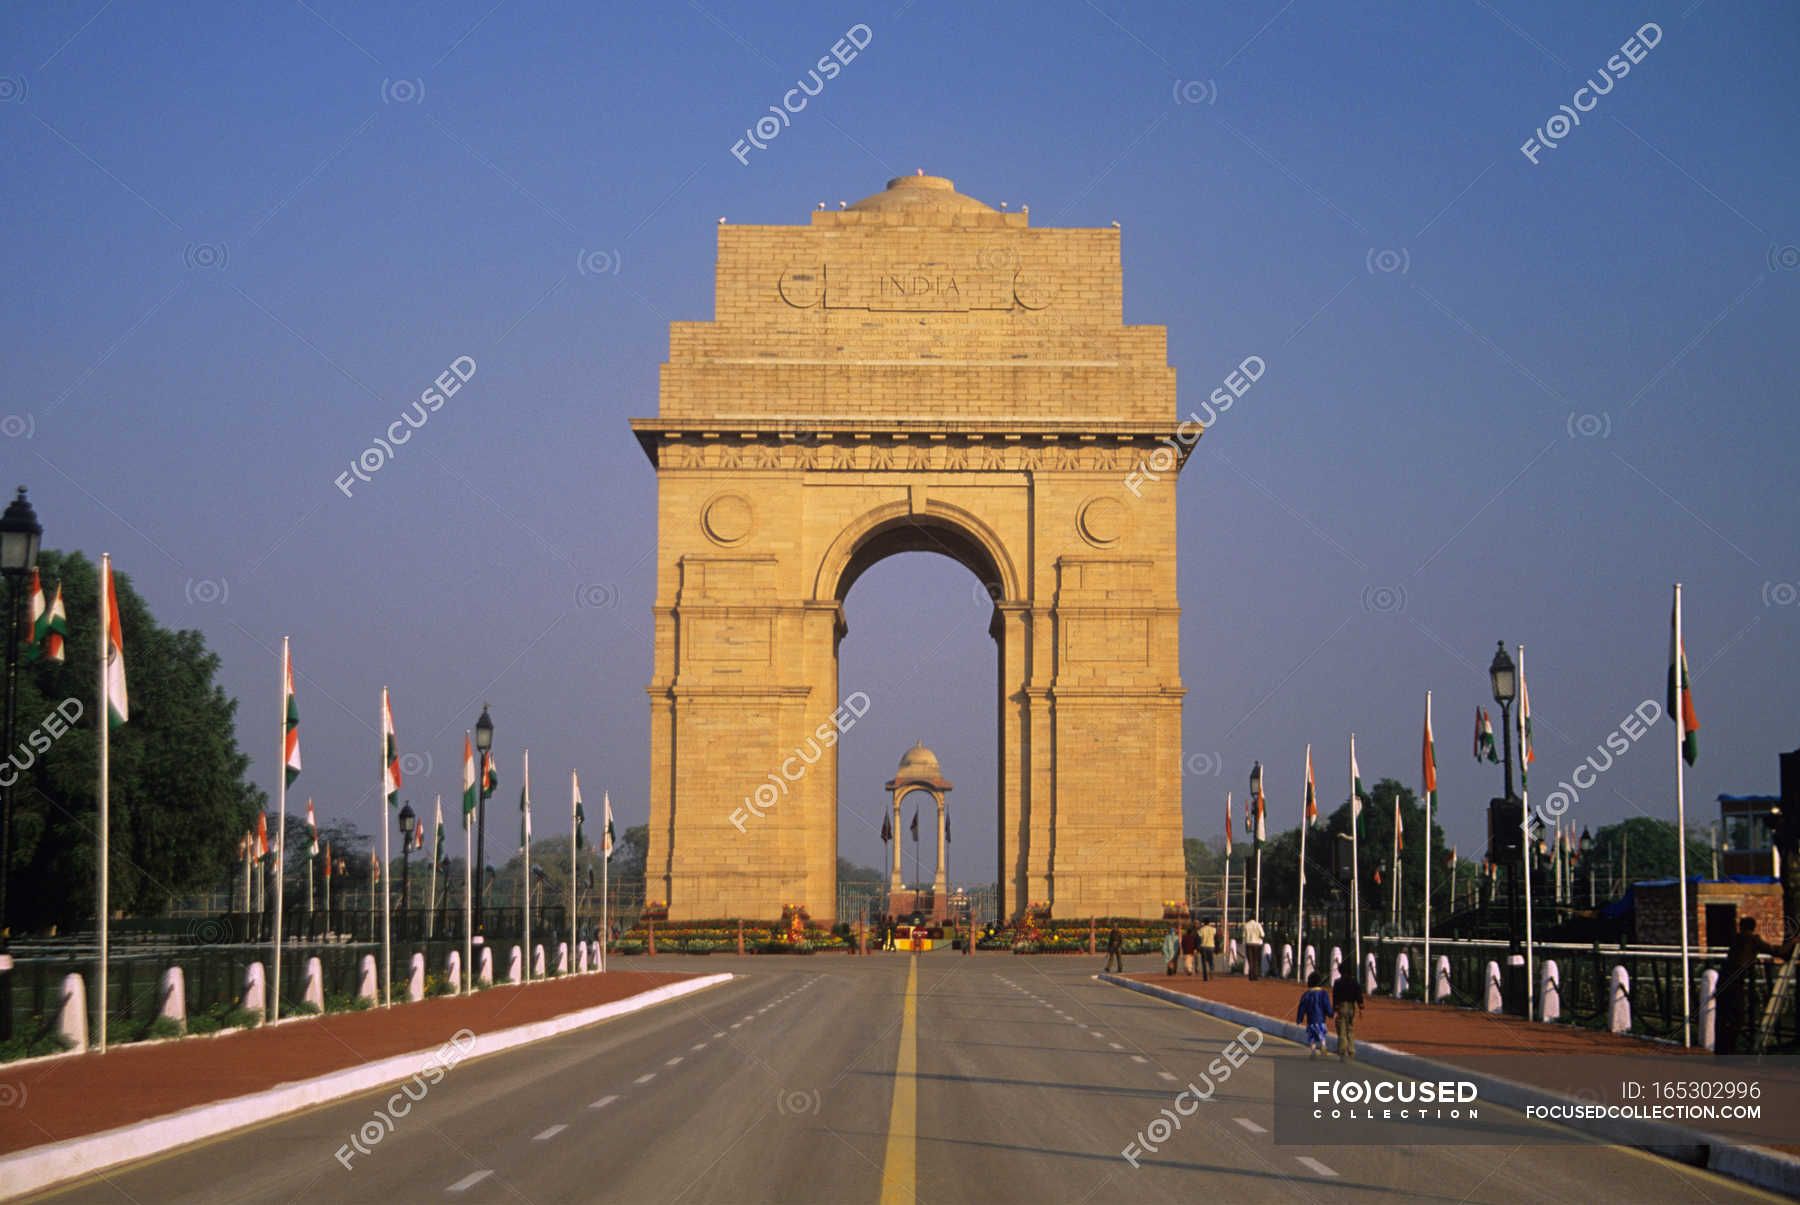 People walking on road in front of India gate — Delhi, historic building -  Stock Photo | #165302996